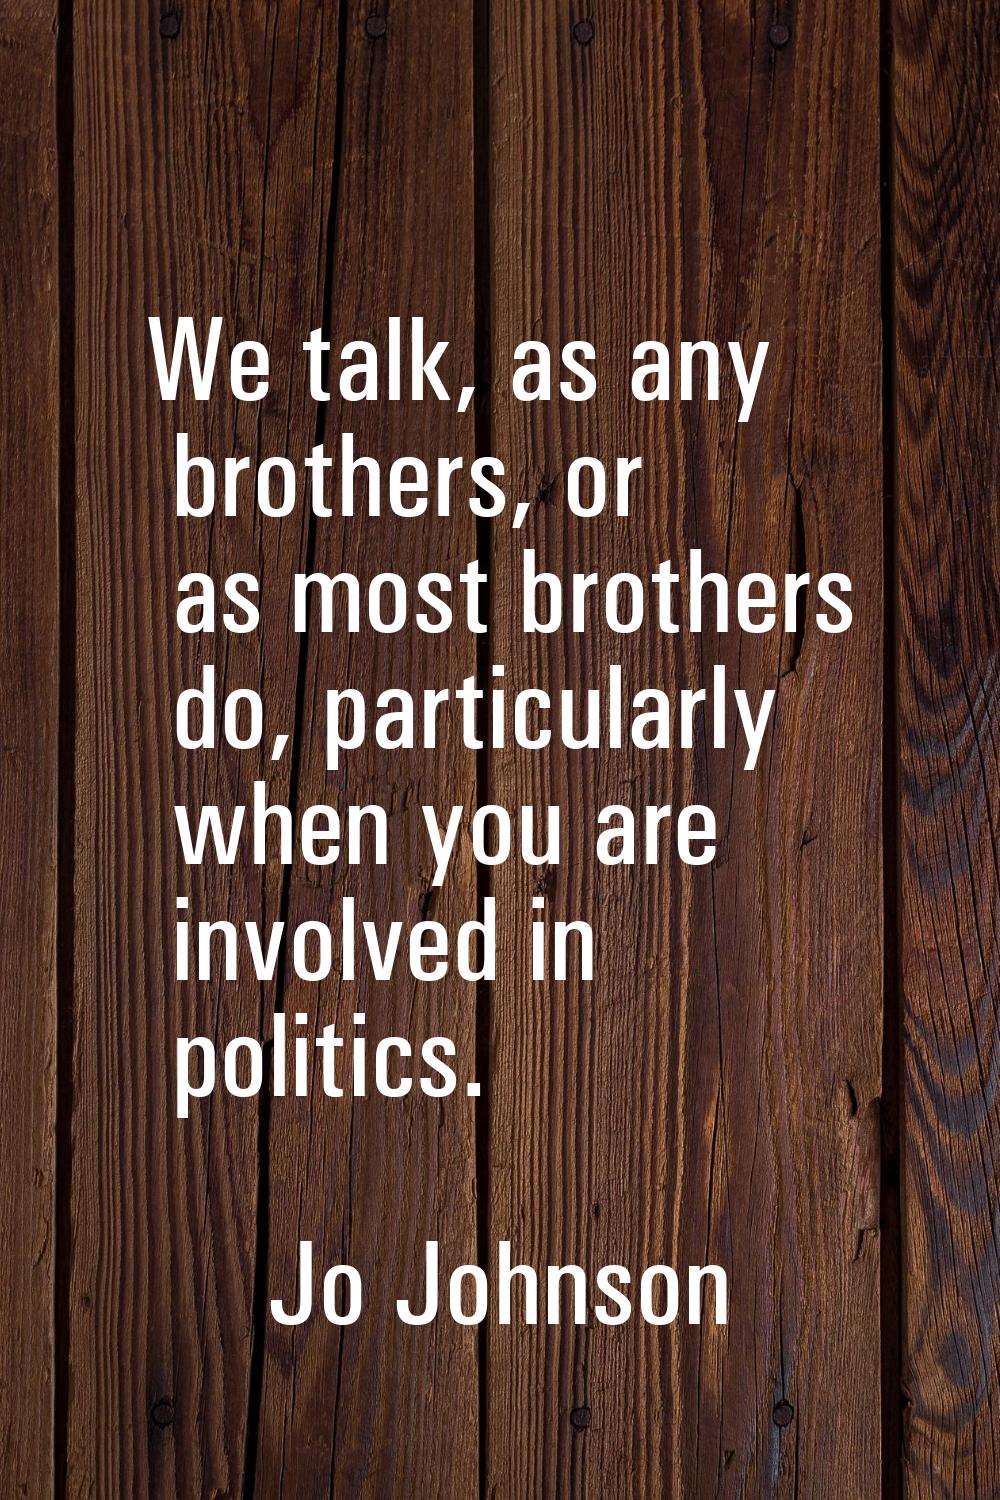 We talk, as any brothers, or as most brothers do, particularly when you are involved in politics.